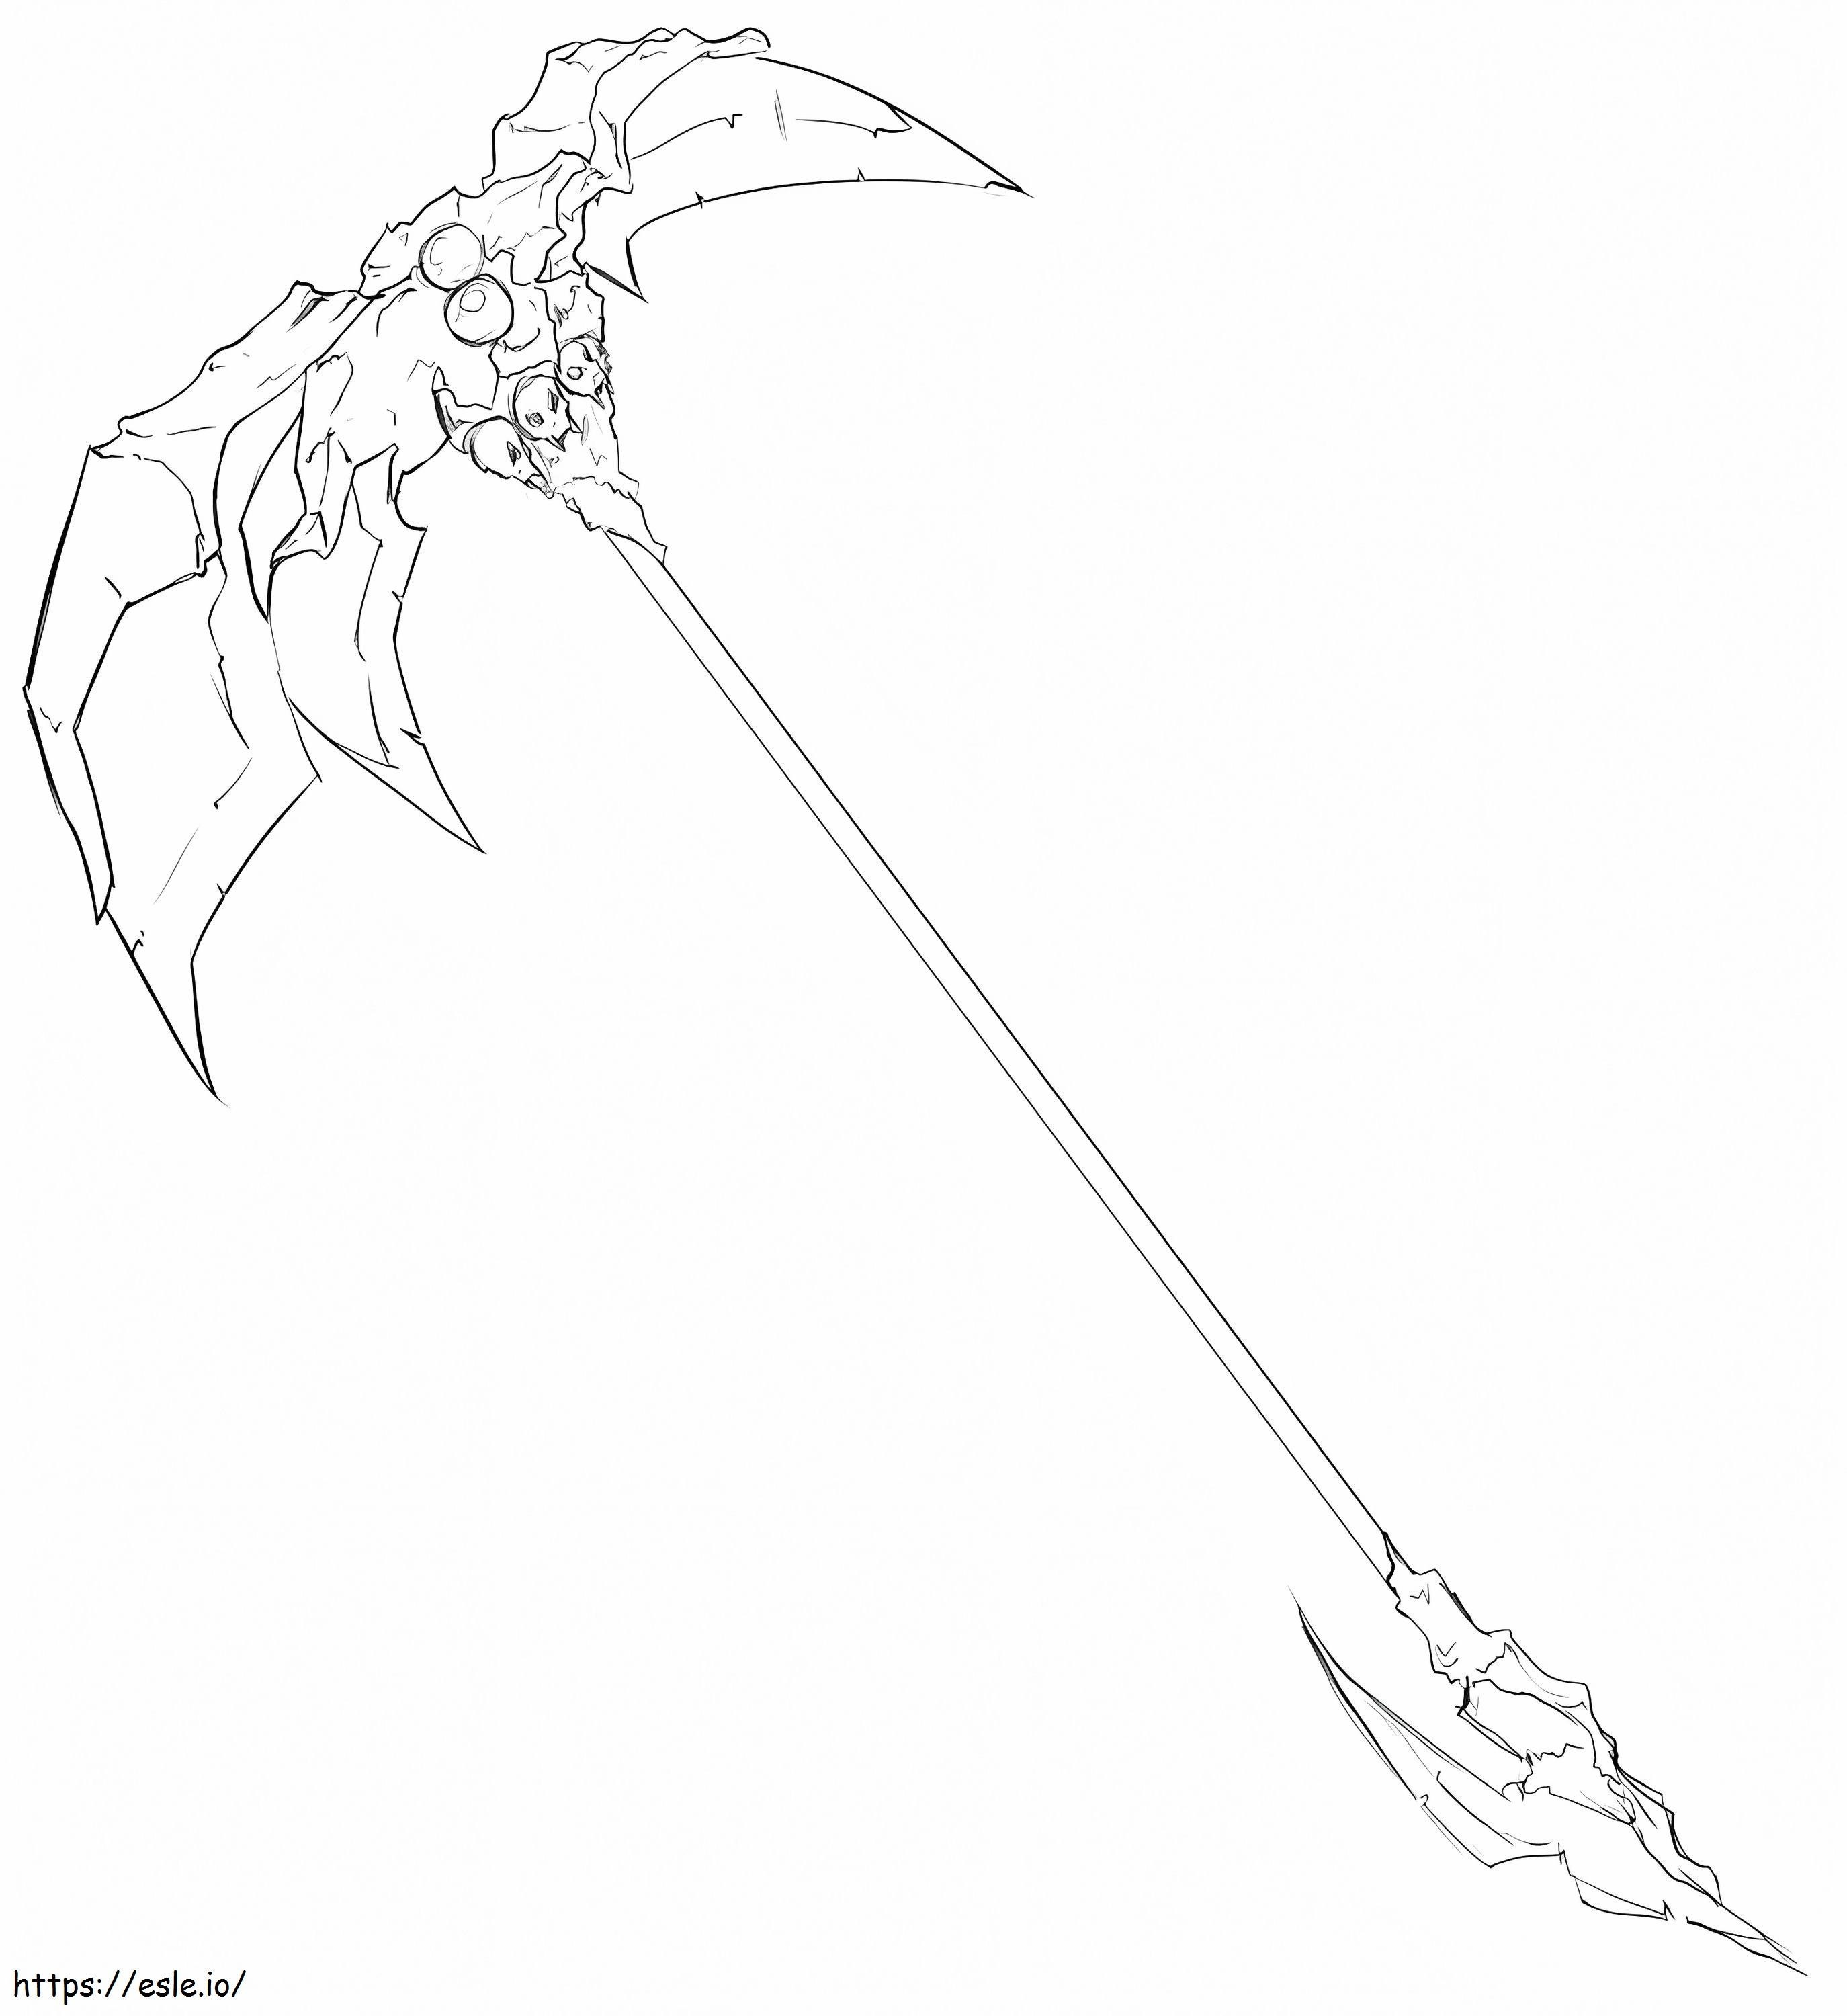 Special Scythe coloring page